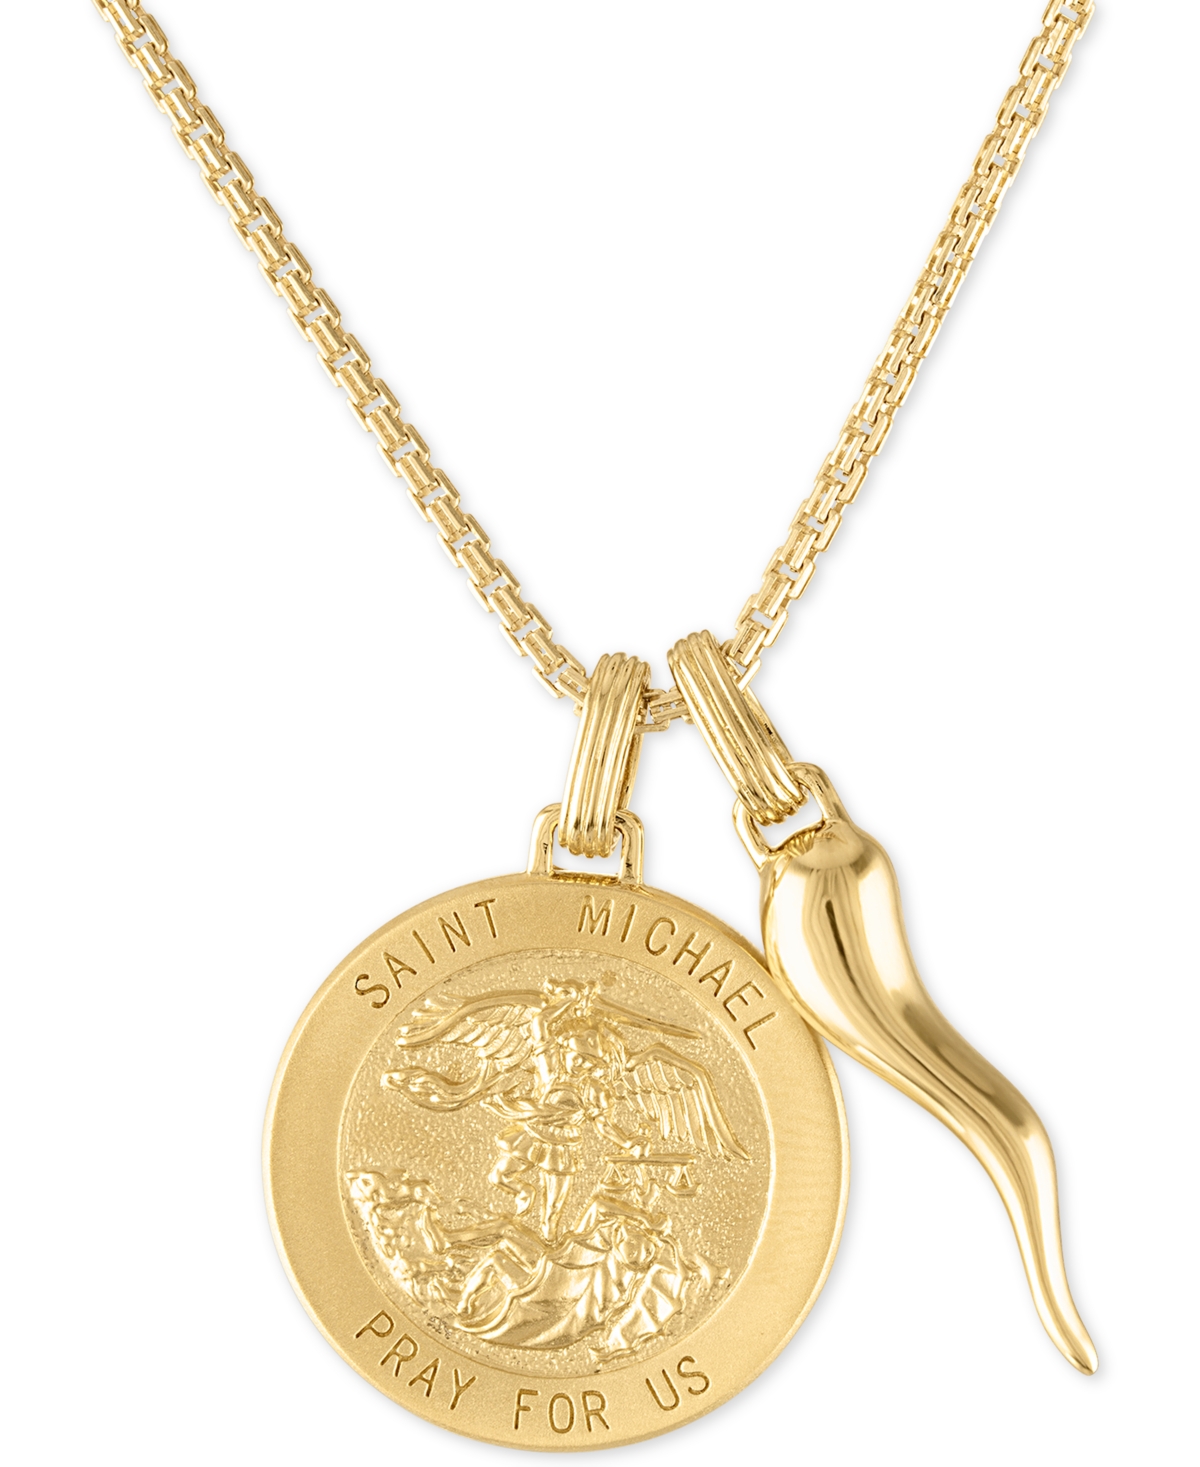 St. Michael Medallion & Horn 24" Pendant Necklace in 14k Gold-Plated Sterling Silver, Created for Macy's - Gold Over Silver